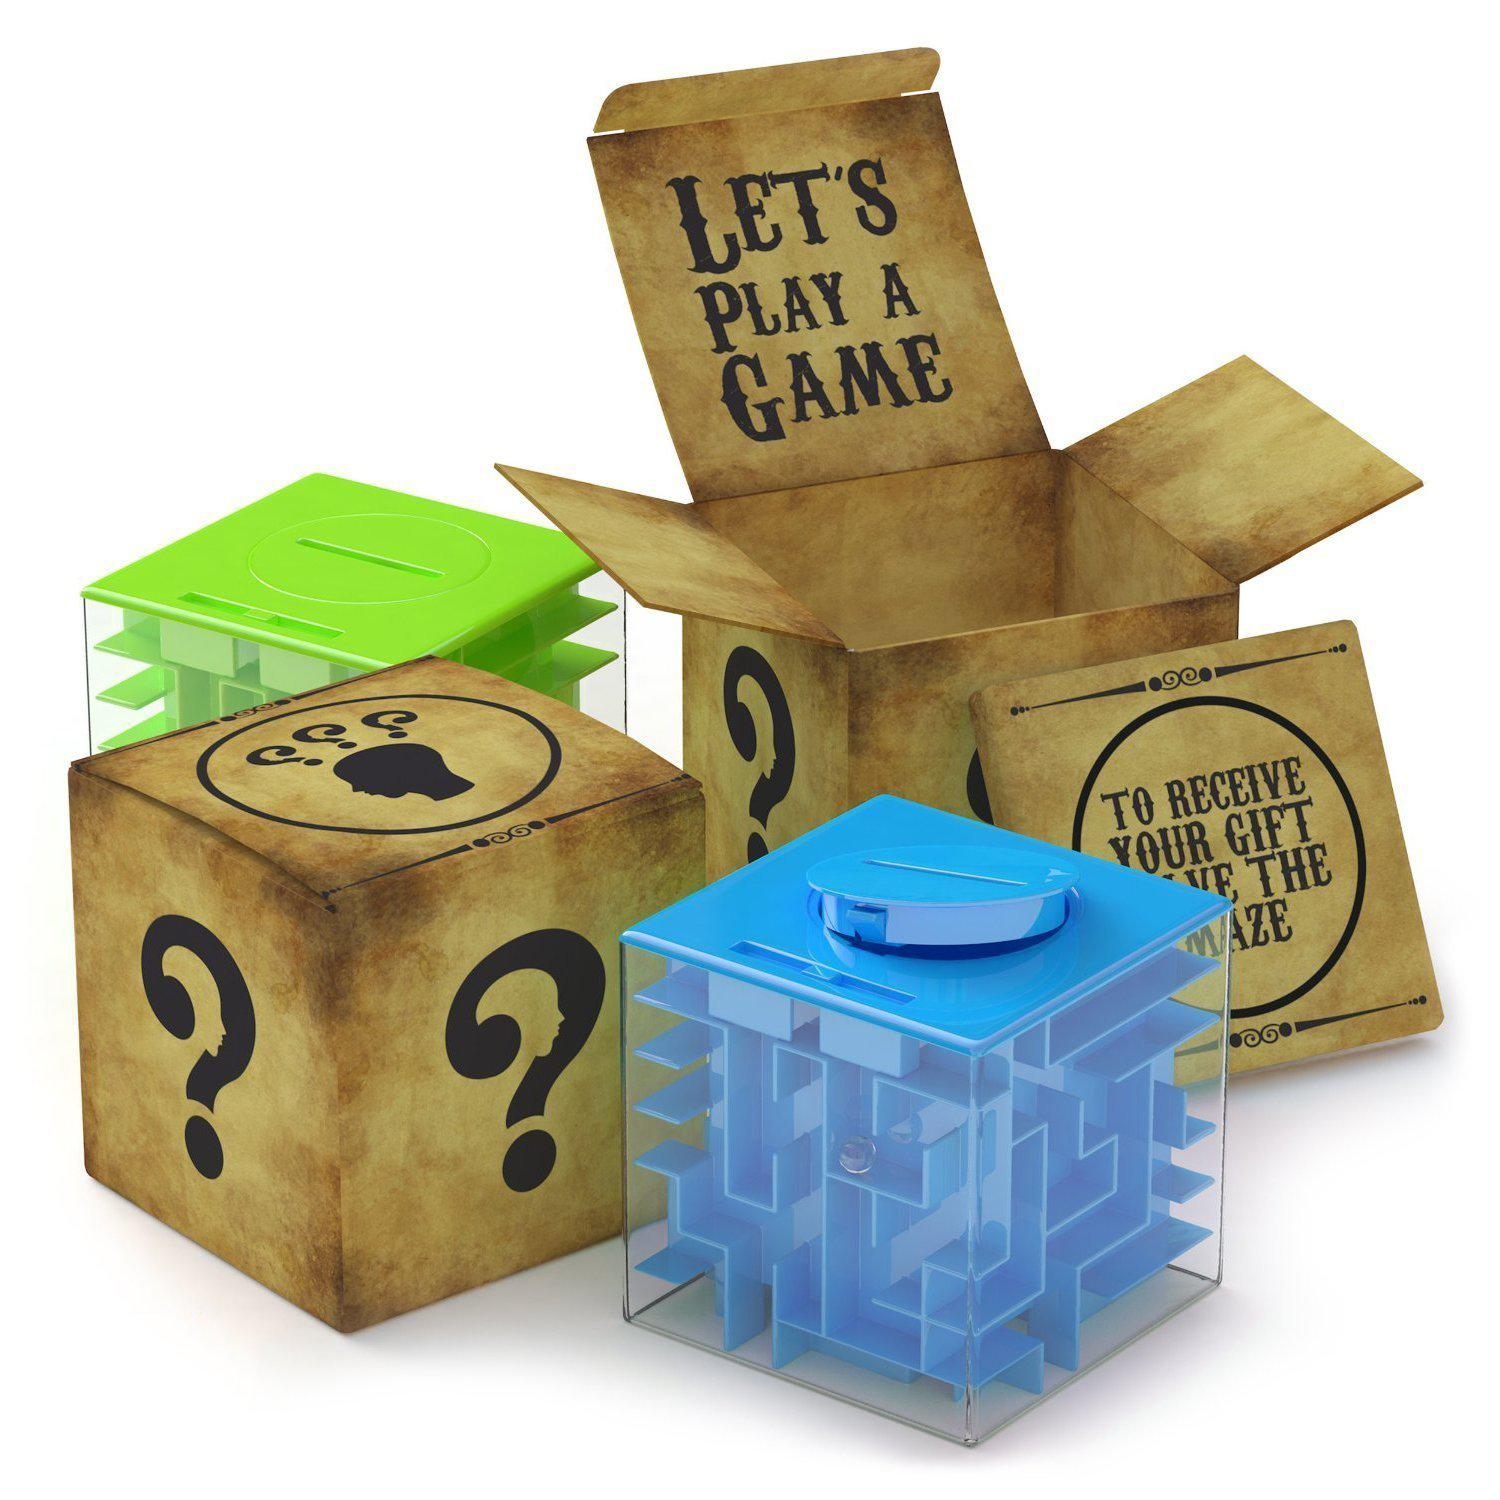 Money Maze Puzzle Box For Kids and Adults Best Offer iNeedTheBestOffer.com